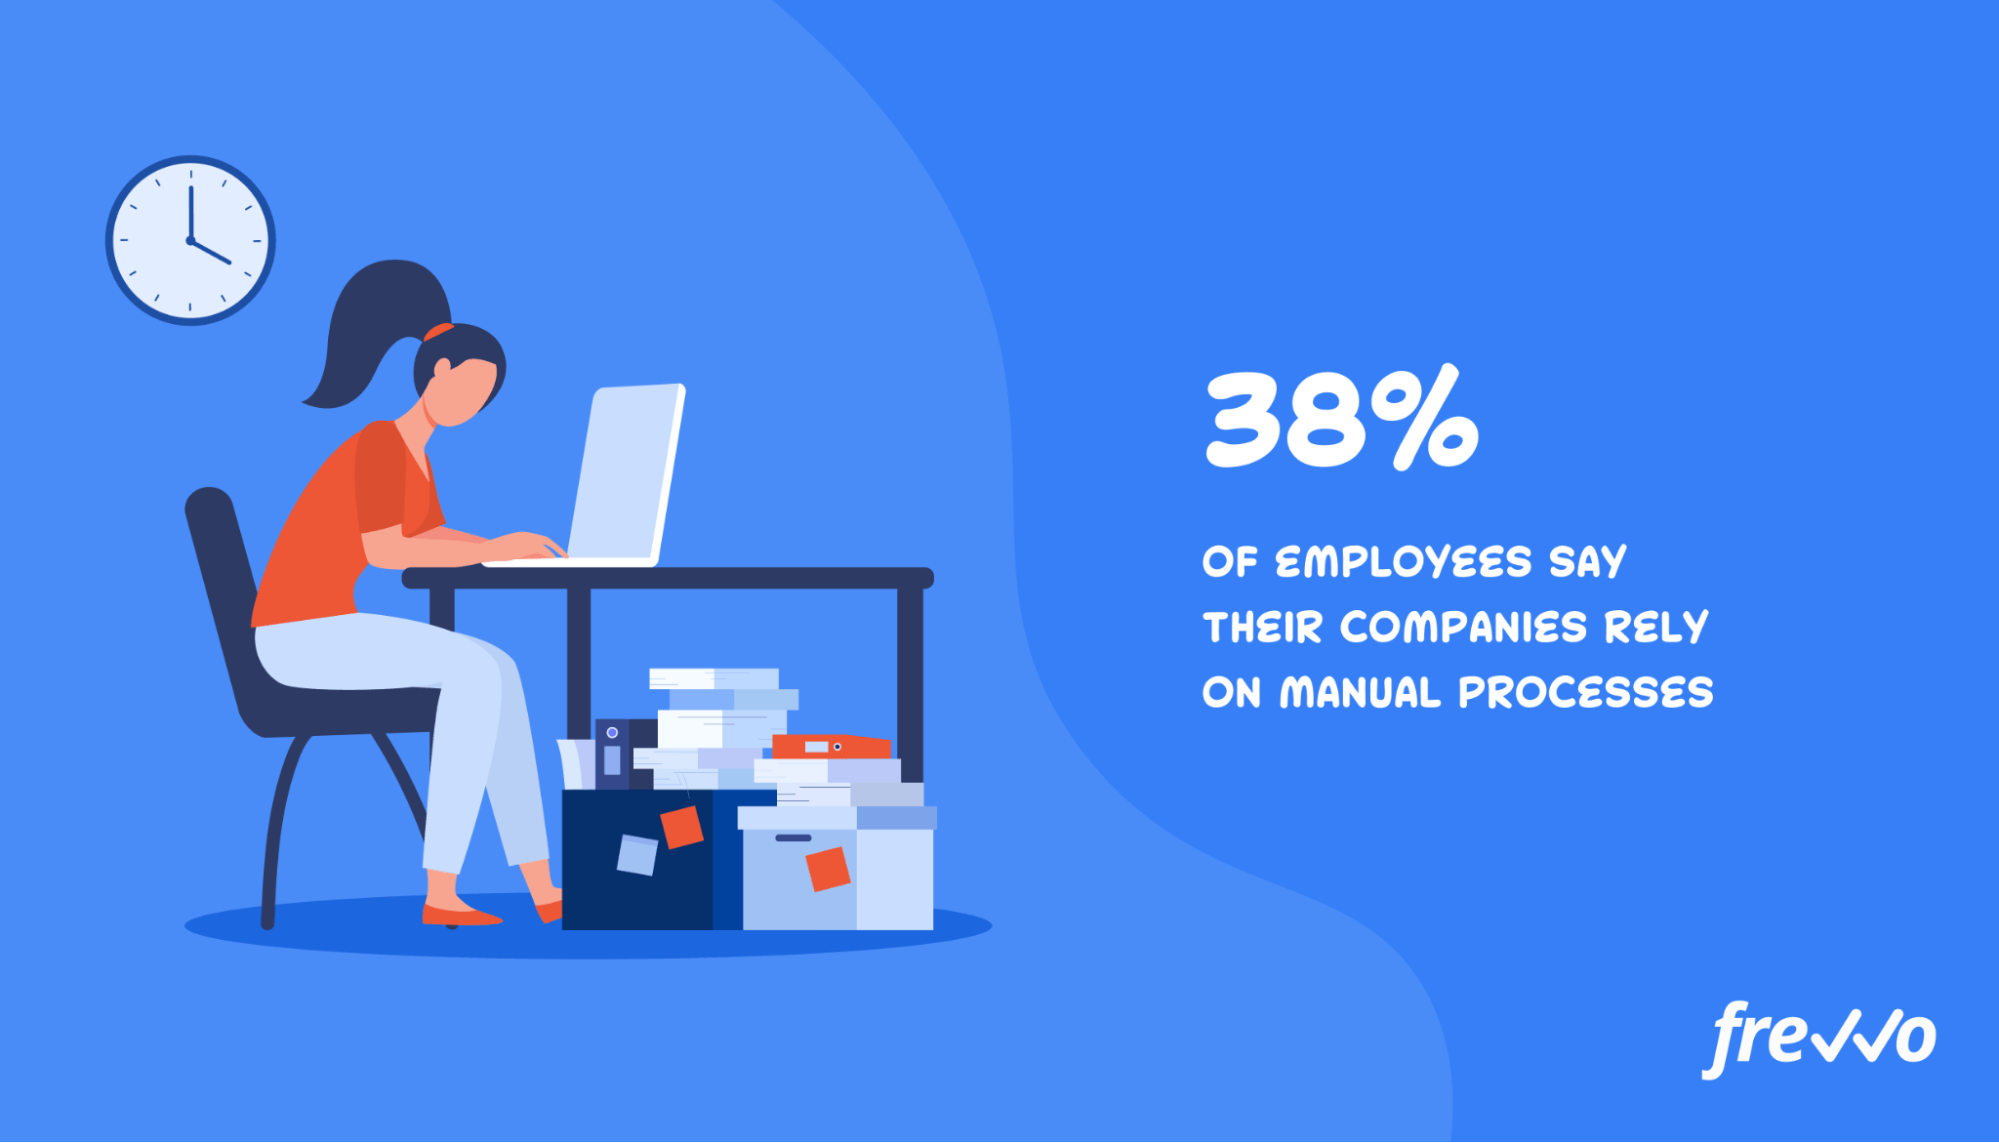 38% of employees say their companies rely on manual processes